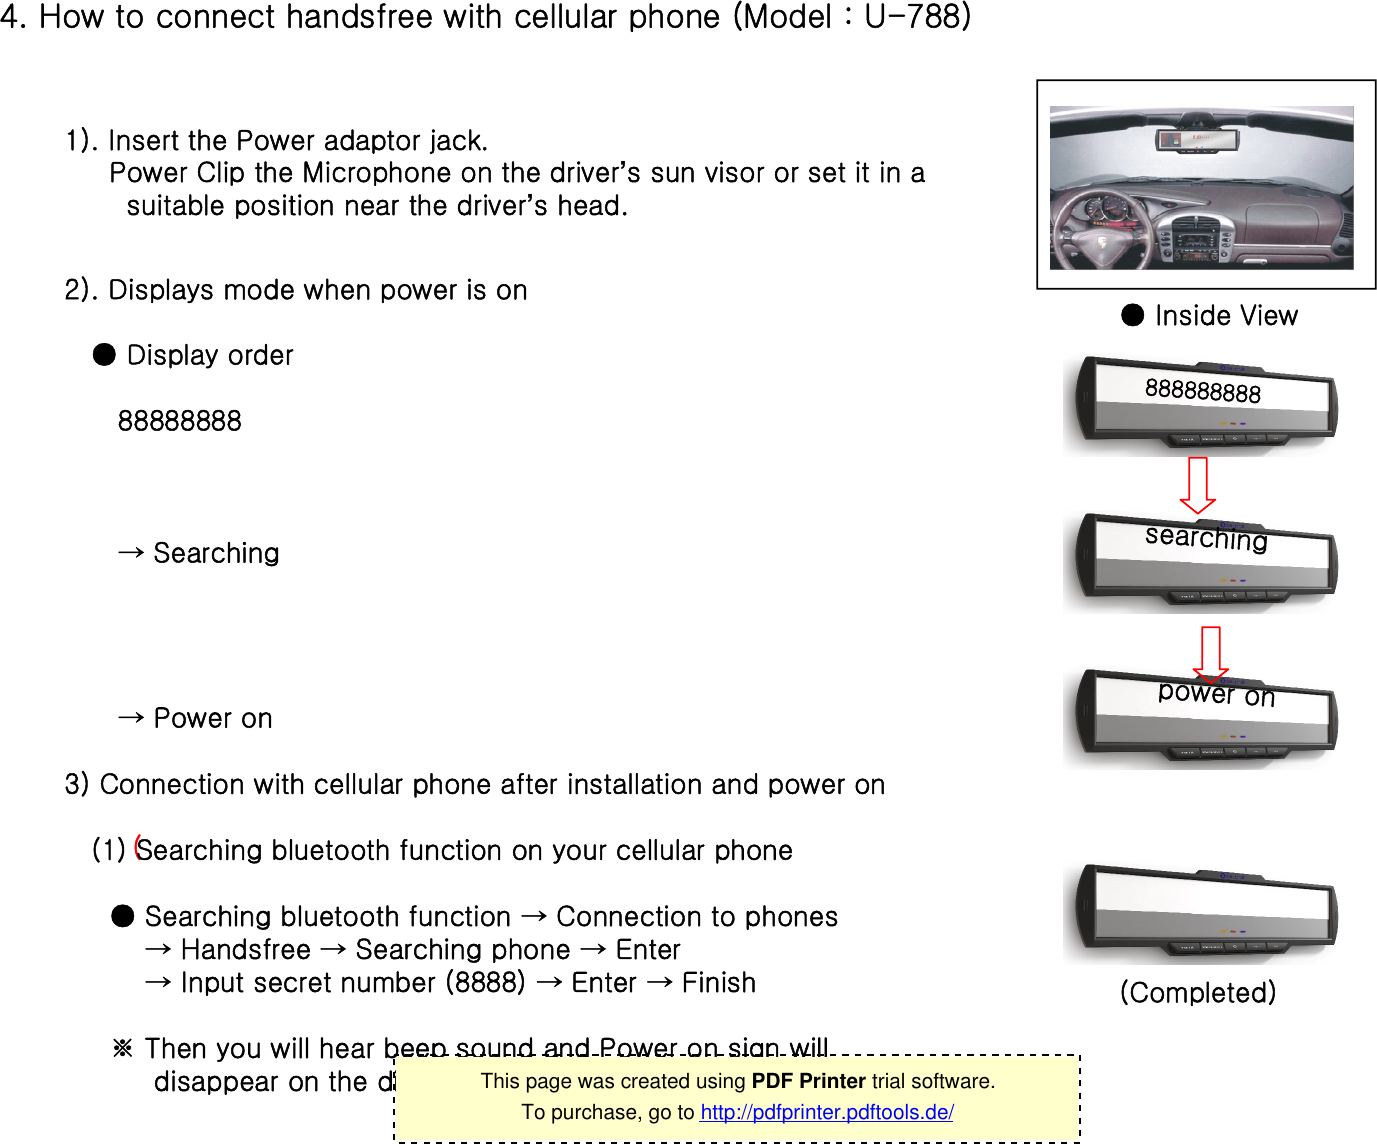 4. How to connect handsfree with cellular phone (Model : U-788) 1). Insert the Power adaptor jack.Power Clip the Microphone on the driver’s sun visor or set it in a suitable position near the driver’s head.● Inside View2). Displays mode when power is on 888888888searchingpower on● Display order88888888→ Searching→ Power on(3) Connection with cellular phone after installation and power on(1) Searching bluetooth function on your cellular phone ● Searching bluetooth function → Connection to phones→ Handsfree → Searching phone → Enter  → Input secret number (8888) → Enter → Finish※ Then you will hear beep sound and Power on sign willdisappear on the display. (Completed) 10This page was created using PDF Printer trial software.To purchase, go to http://pdfprinter.pdftools.de/